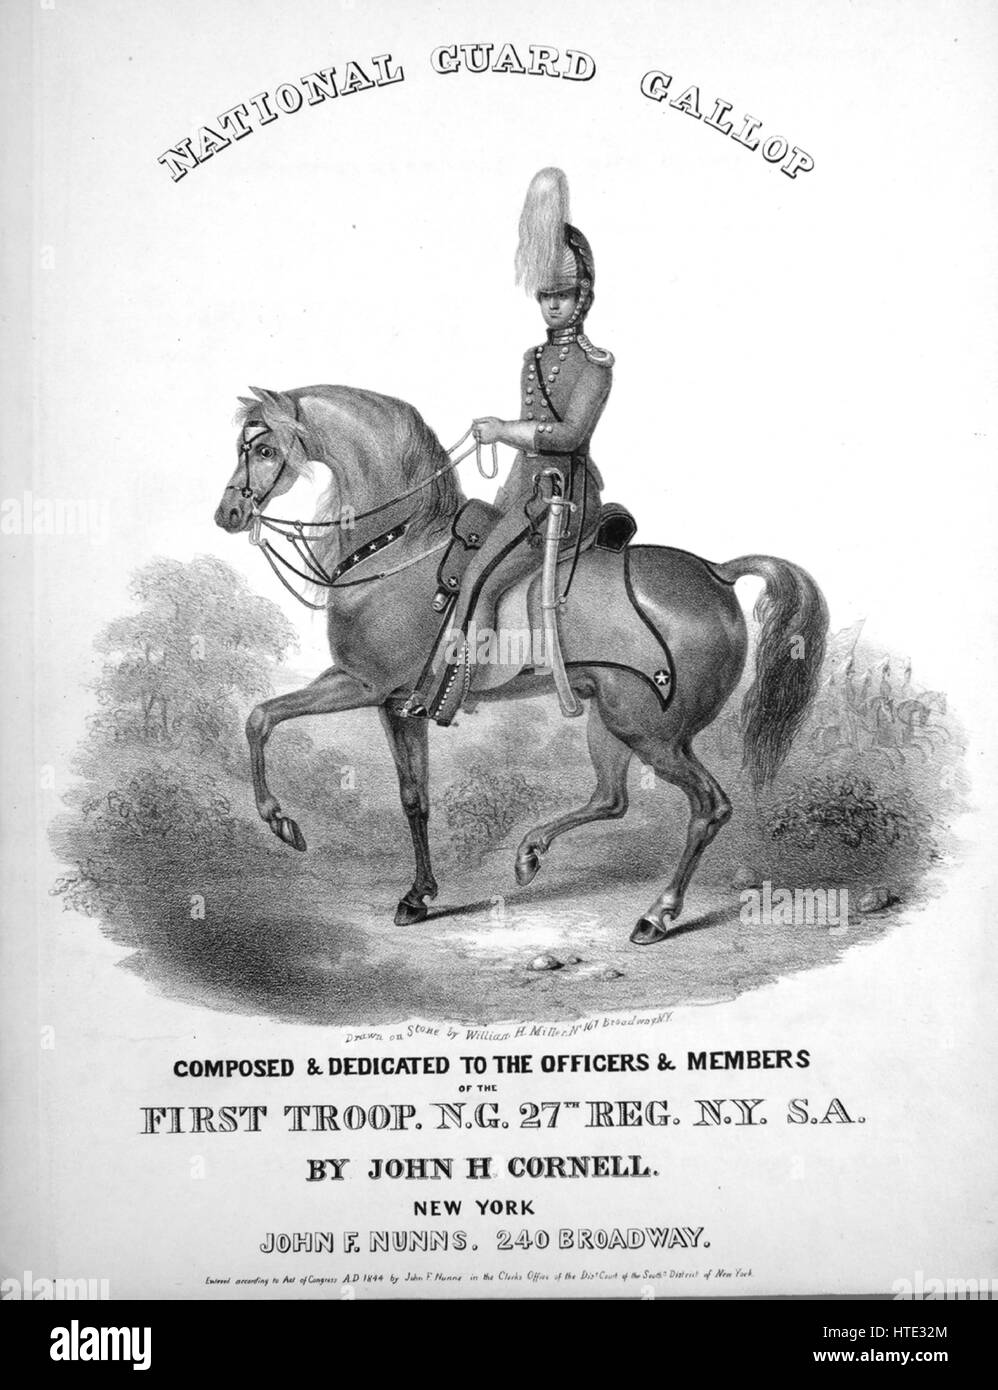 Sheet music cover image of the song 'National Guard Gallop', with original authorship notes reading 'Composed by John H Cornell', United States, 1844. The publisher is listed as 'John F. Nunns, 240 Broadway', the form of composition is 'sectional', the instrumentation is 'piano', the first line reads 'None', and the illustration artist is listed as 'Drawn on Stone by William H. Miller, No.167 Broadway N.Y.; G.W. Quidor Engvr.'. Stock Photo